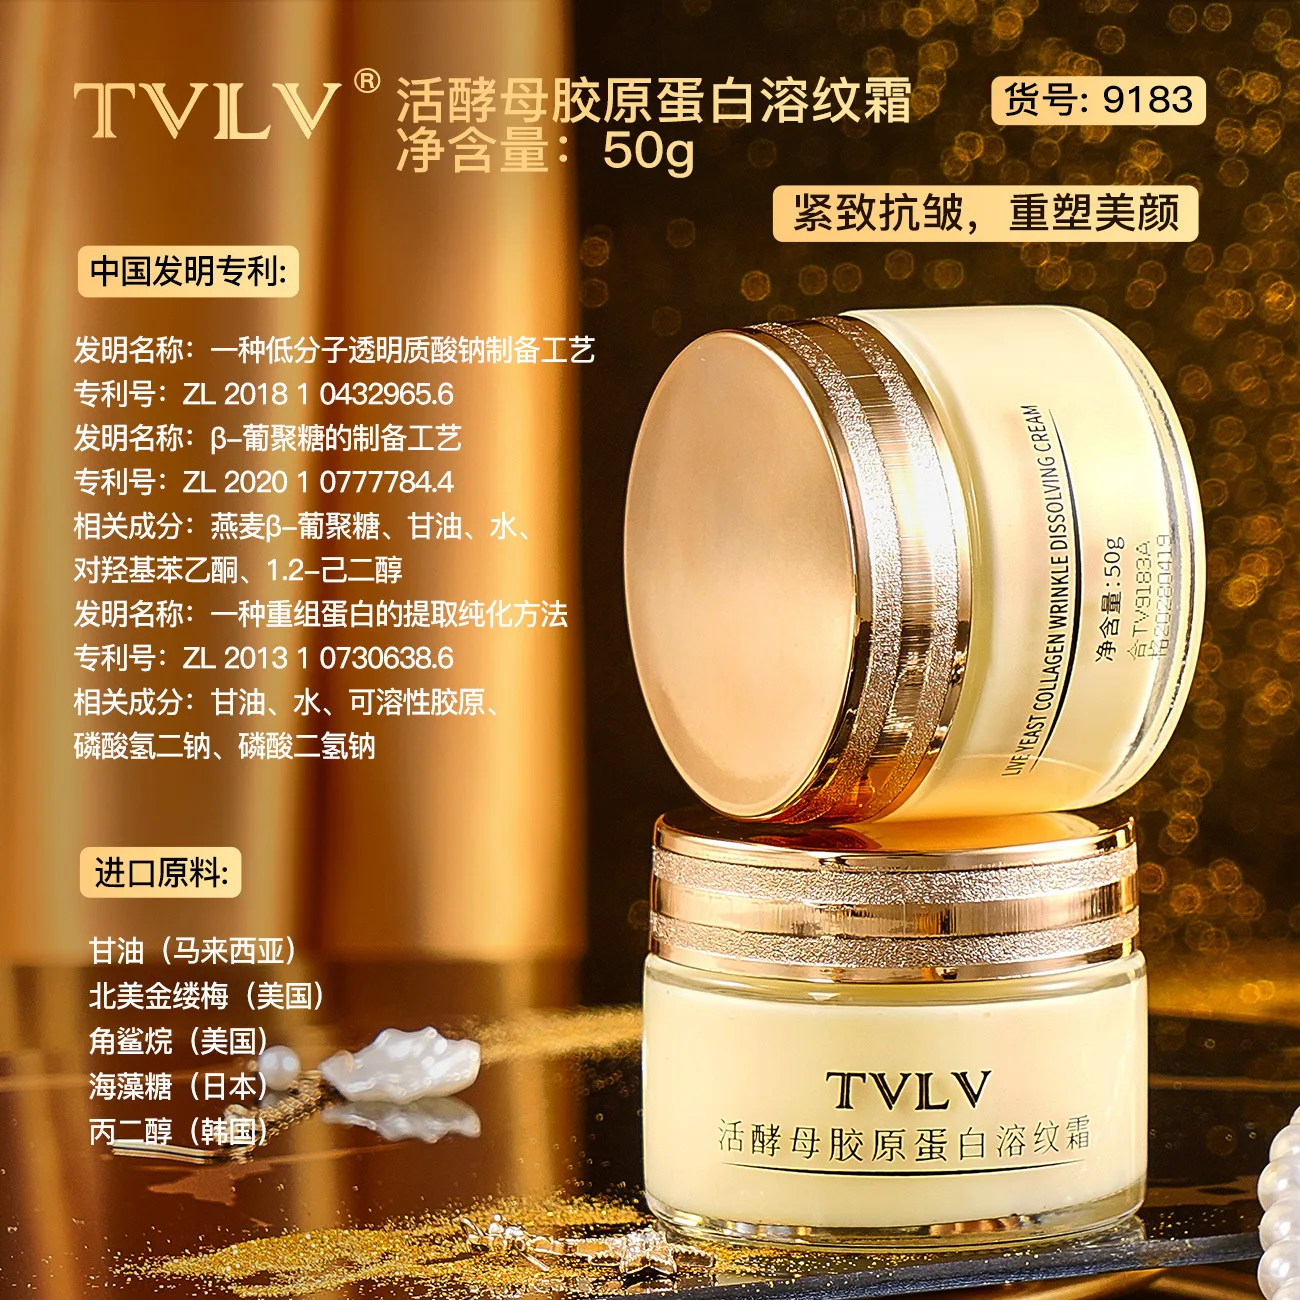 Active yeast collagen texture dissolving cream lazy face cream firming, brightening, moisturizing and skin care lady cream